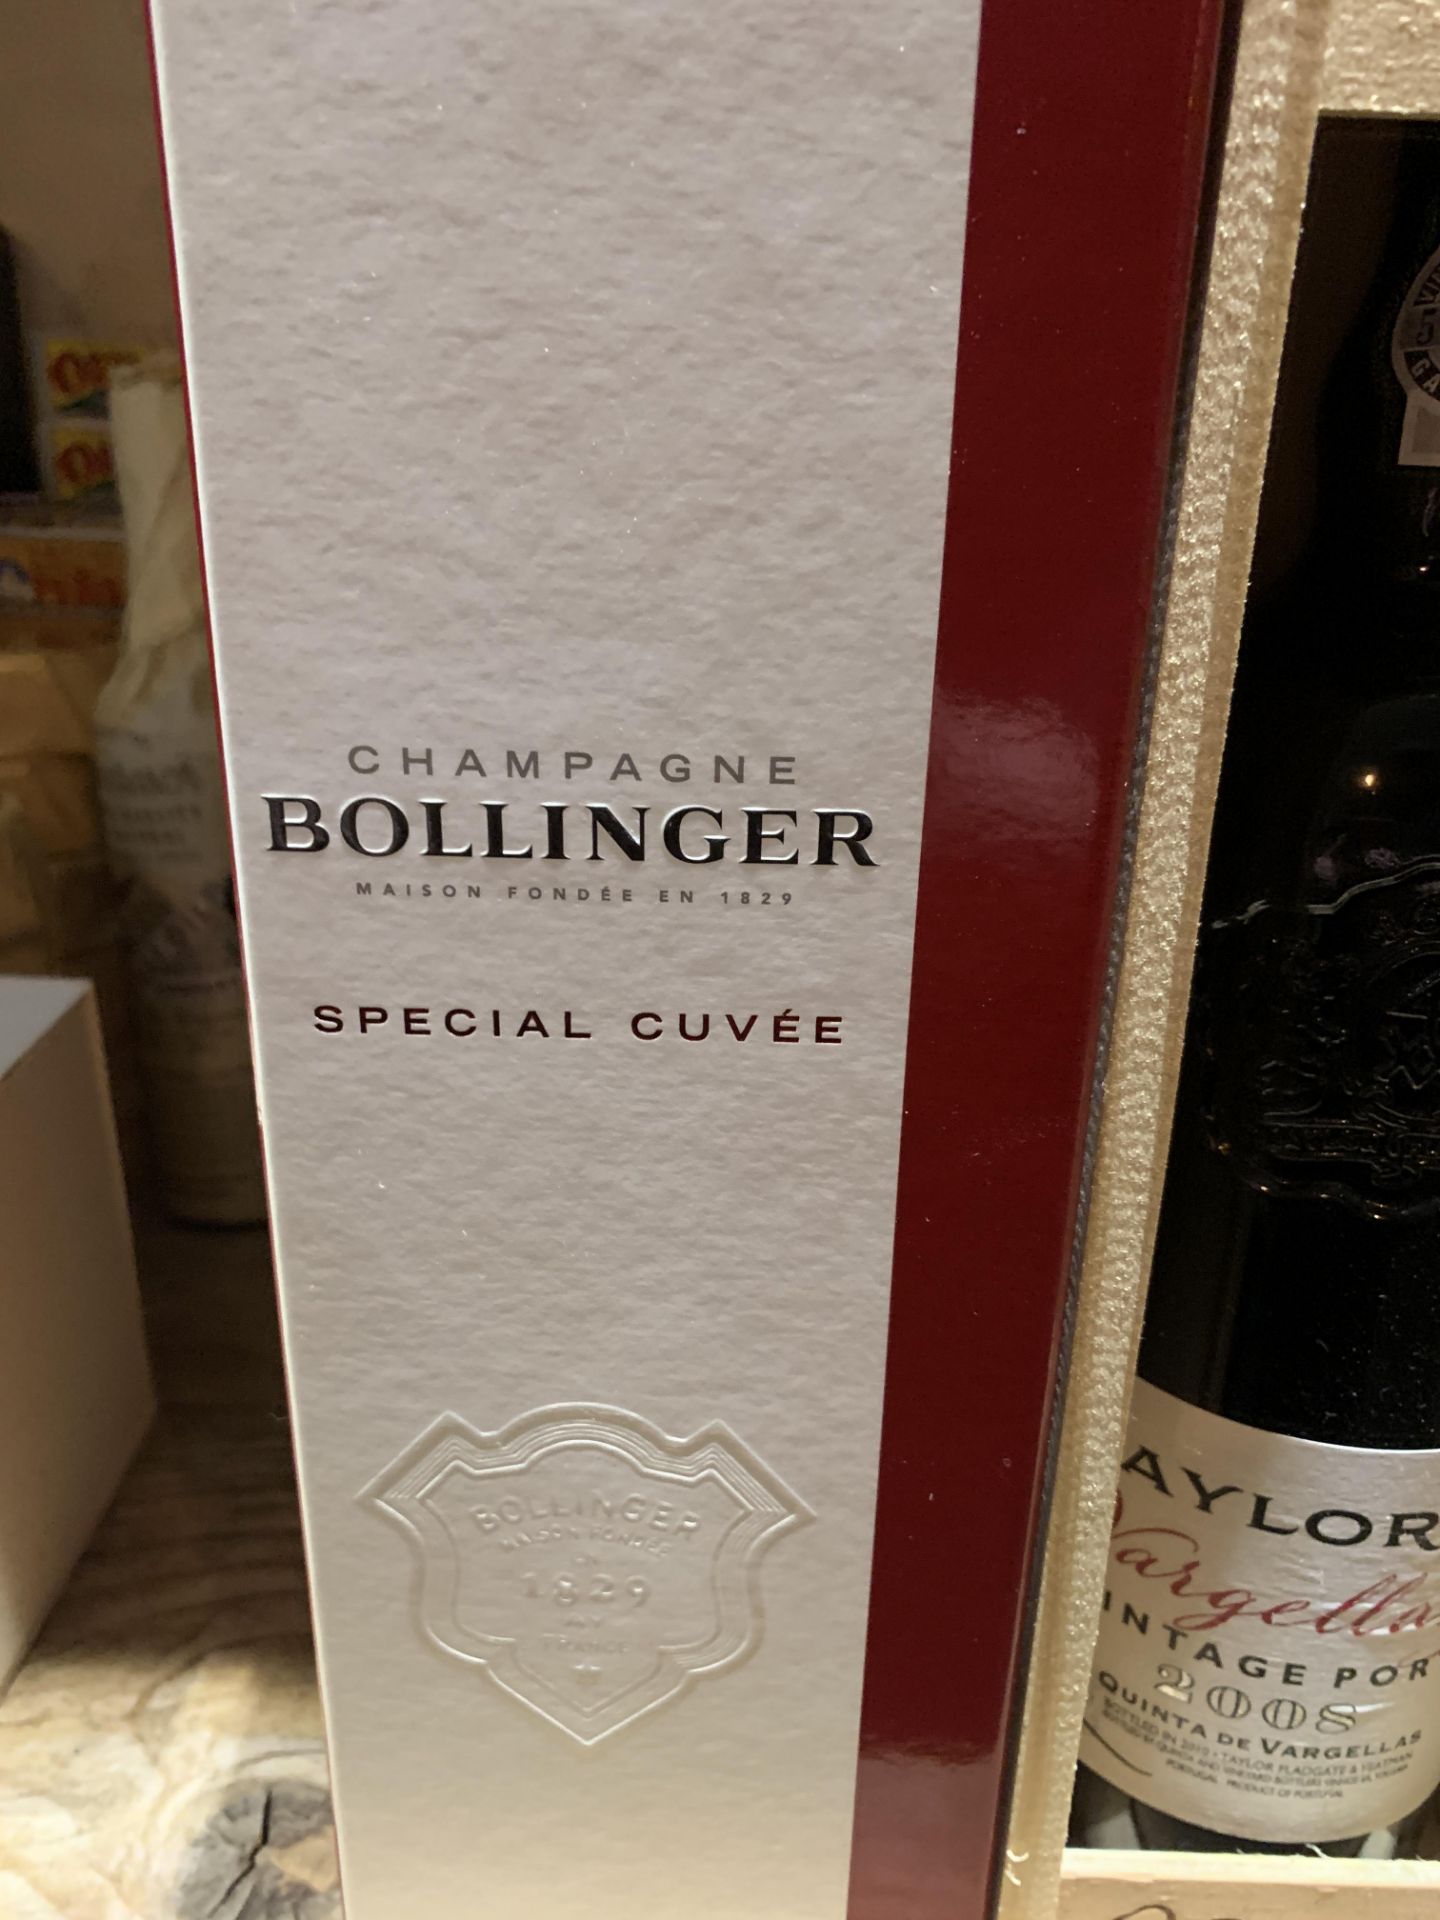 Boxed Bottle of Bollinger Special Cuvee Champagne and a Boxed Bottle of Taylor's Port - Image 2 of 7